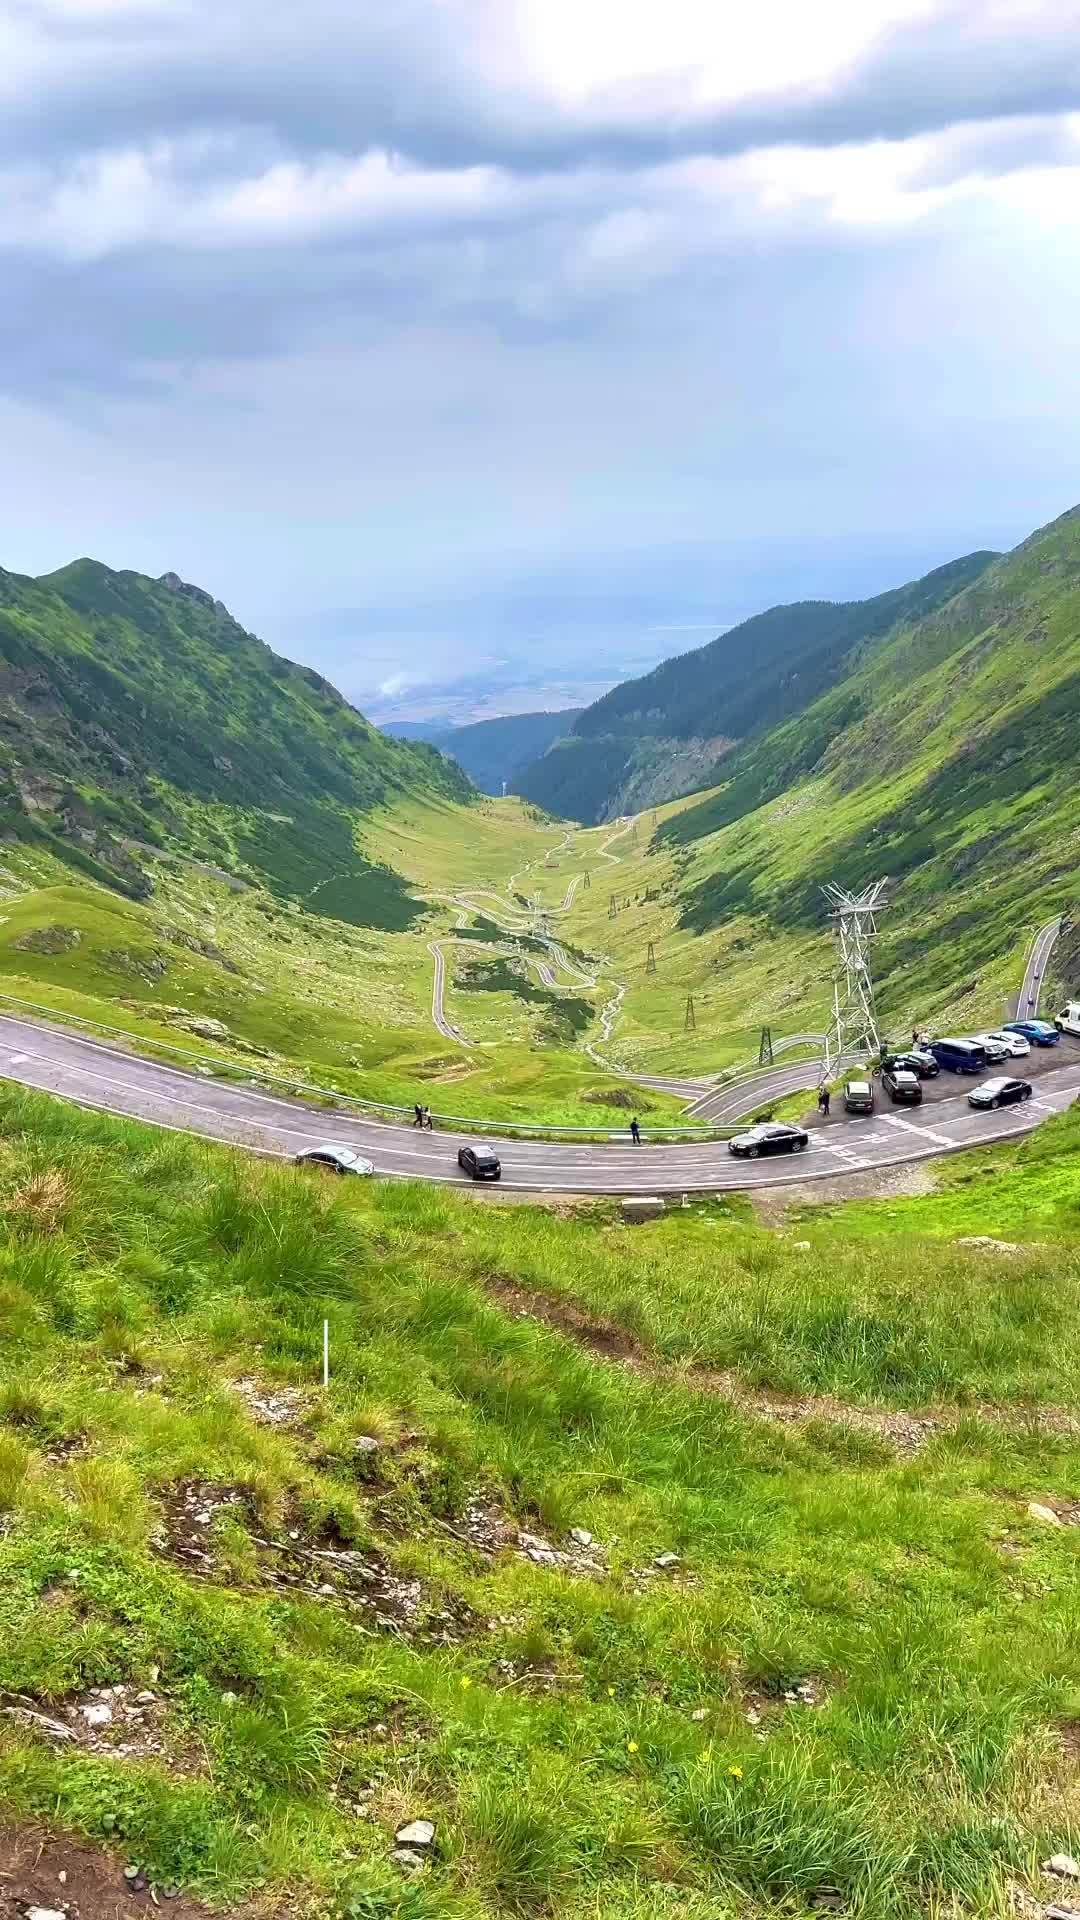 NEVER GIVE UP

You may be the only person left who believes in you,
but it’s enough. It takes just one star to pierce
a universe of darkness.

JUST KEEP GOING

📍Transfagarasan, Romania 🇷🇴 

#travel #aroundtheworld #beautifuldestination s #believe #europe #românia #romaniamagica #explore#backpacker#backpa king #traveltheworld #waterfall #transfagarasan #romania #nevergiveup